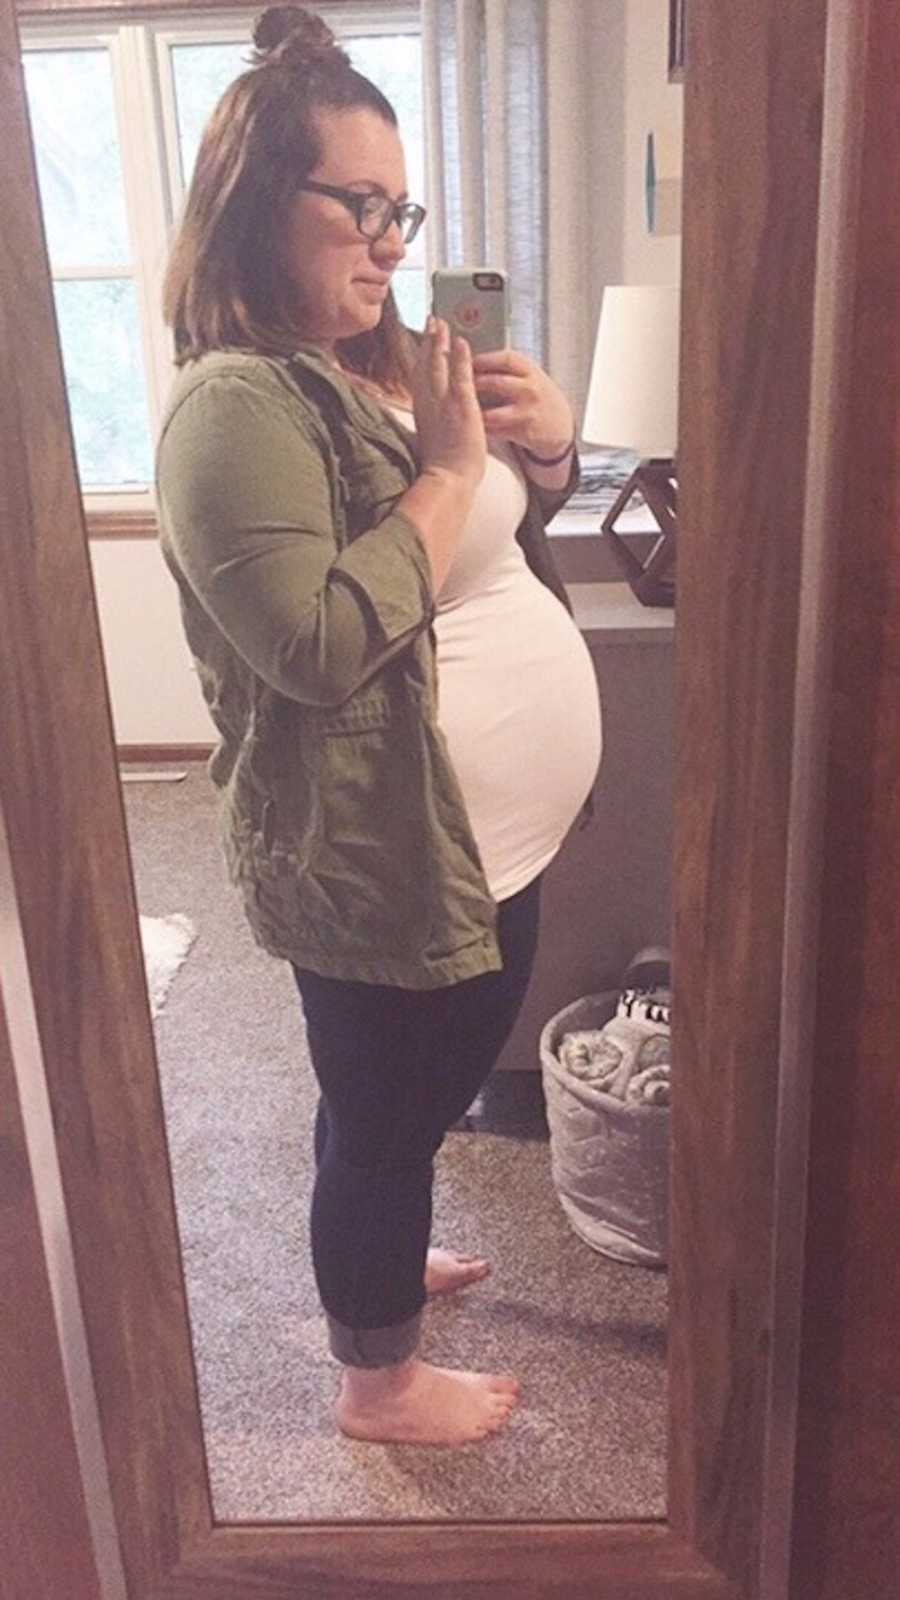 Pregnant woman who had a few miscarriages stands taking mirror selfie in home